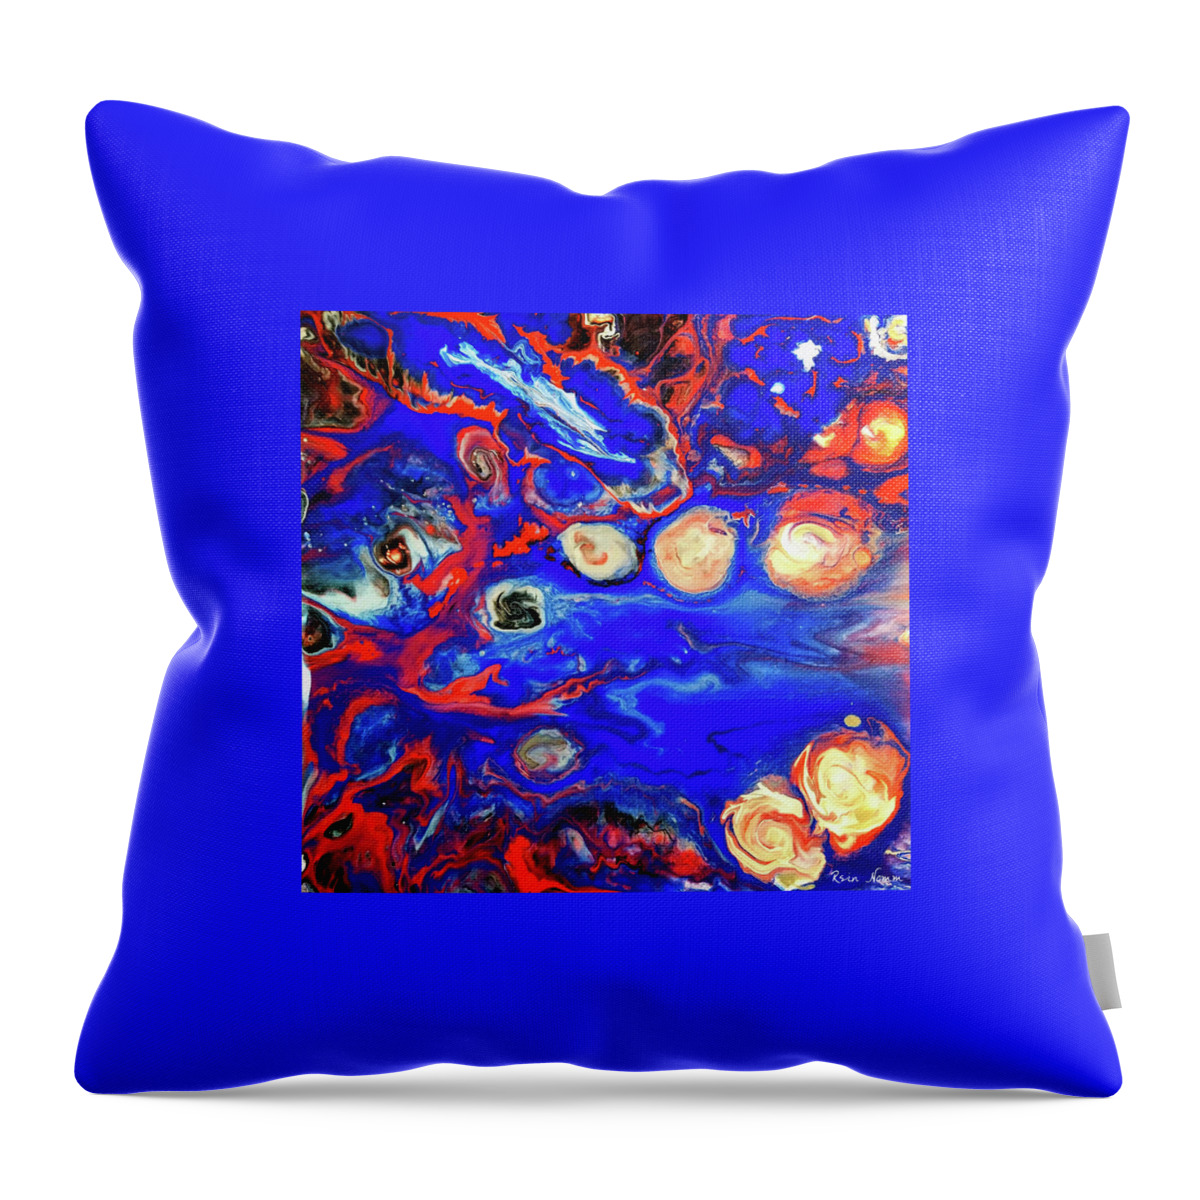  Throw Pillow featuring the painting Falling Victim by Rein Nomm